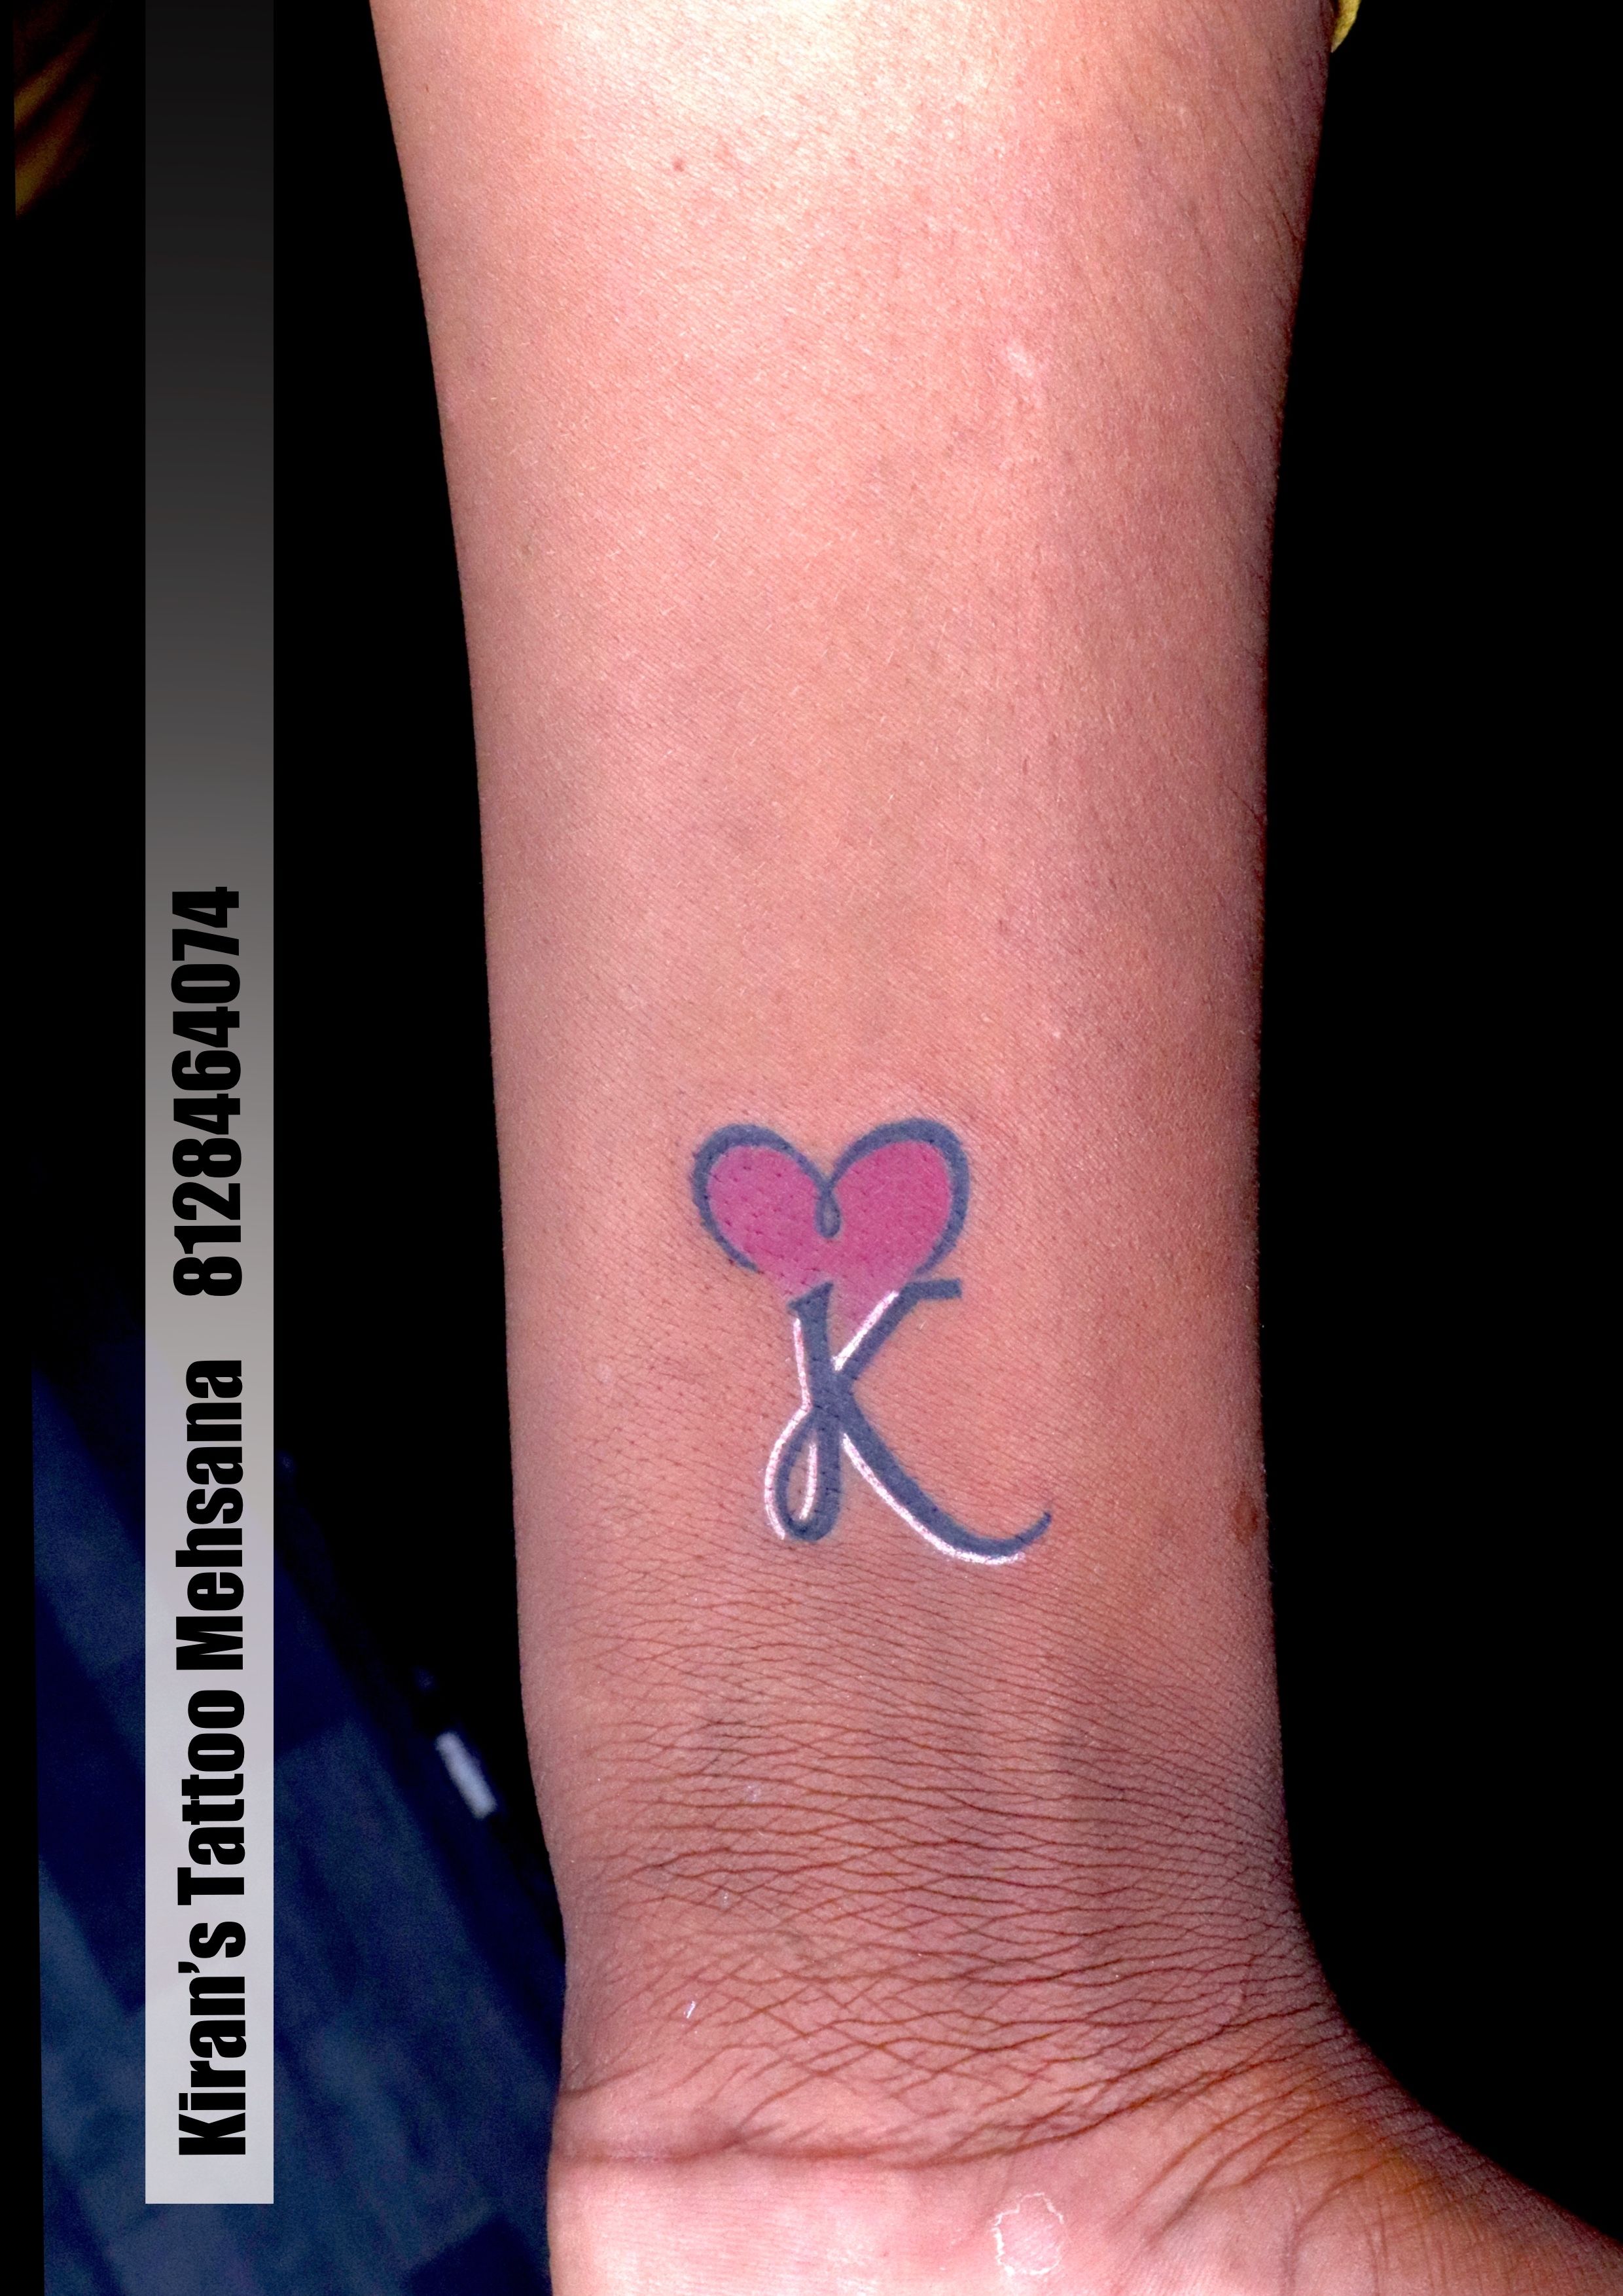 181 Tattooz Studio - Initial S and K merge in way to form a heart shape  which is highlighted by red color. The initial tattoo on wrist is most  preferred tattoo by